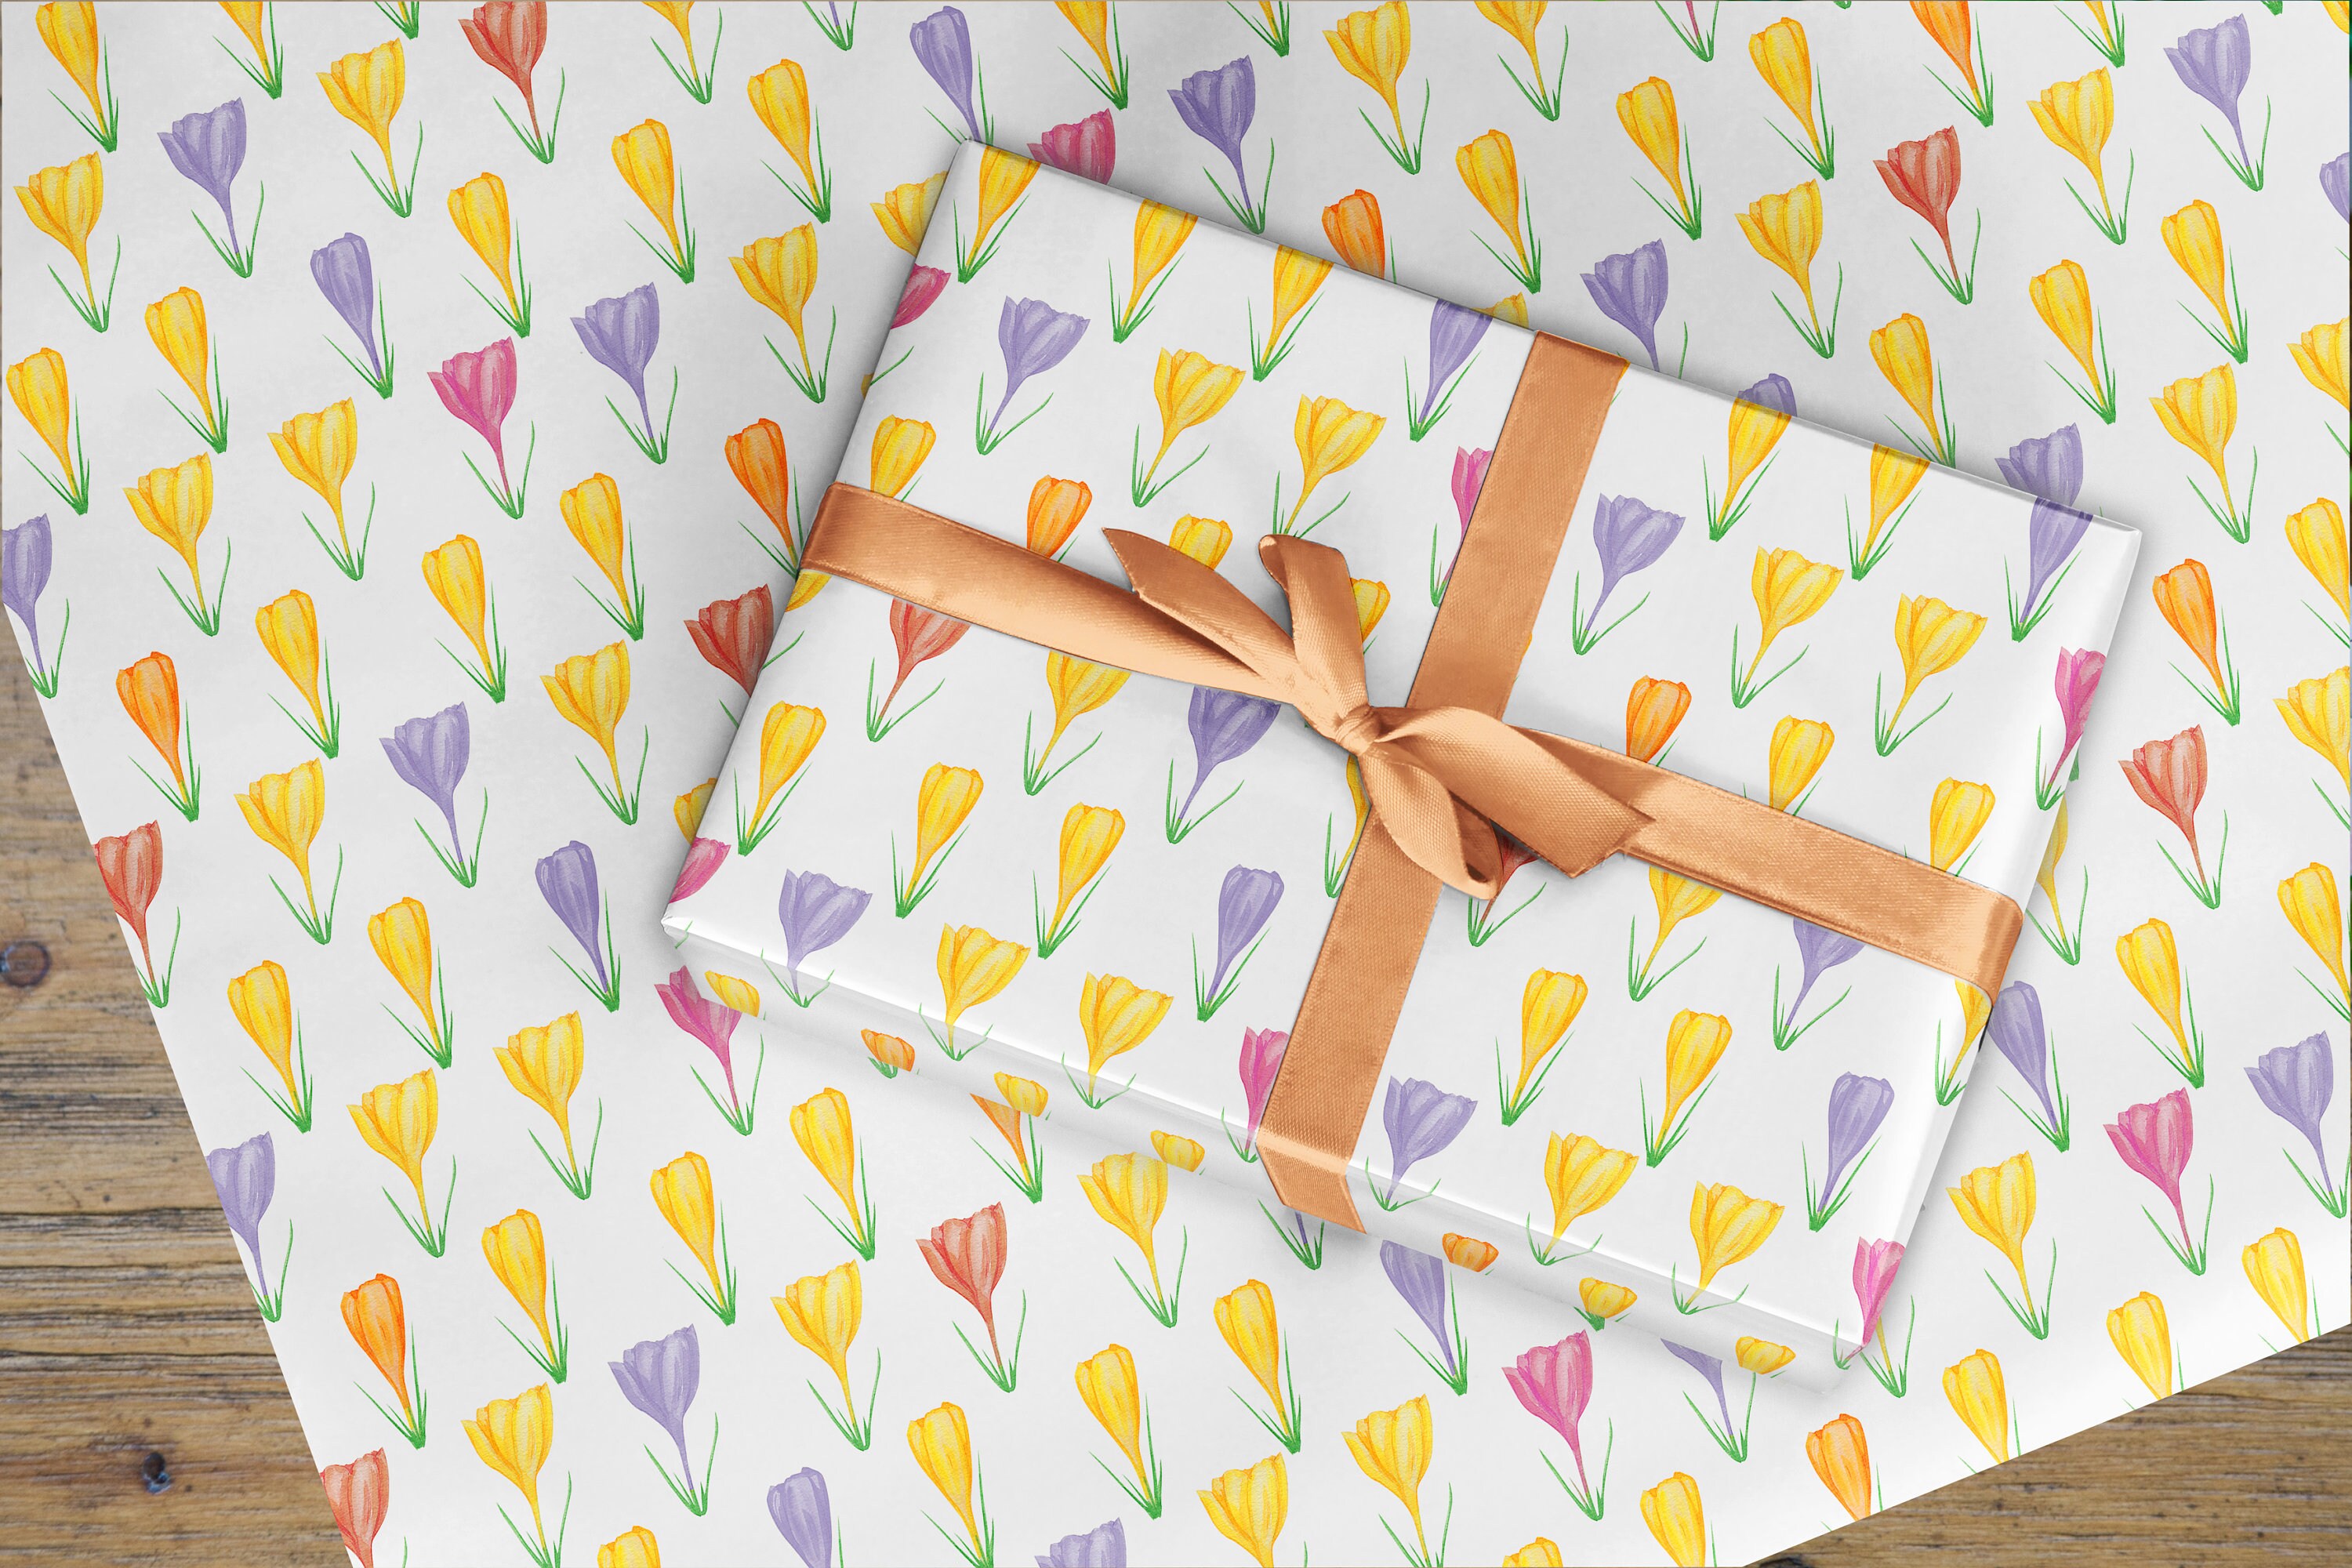 Buy Decorative leaves recycled wrapping paper: Delivery by Crocus